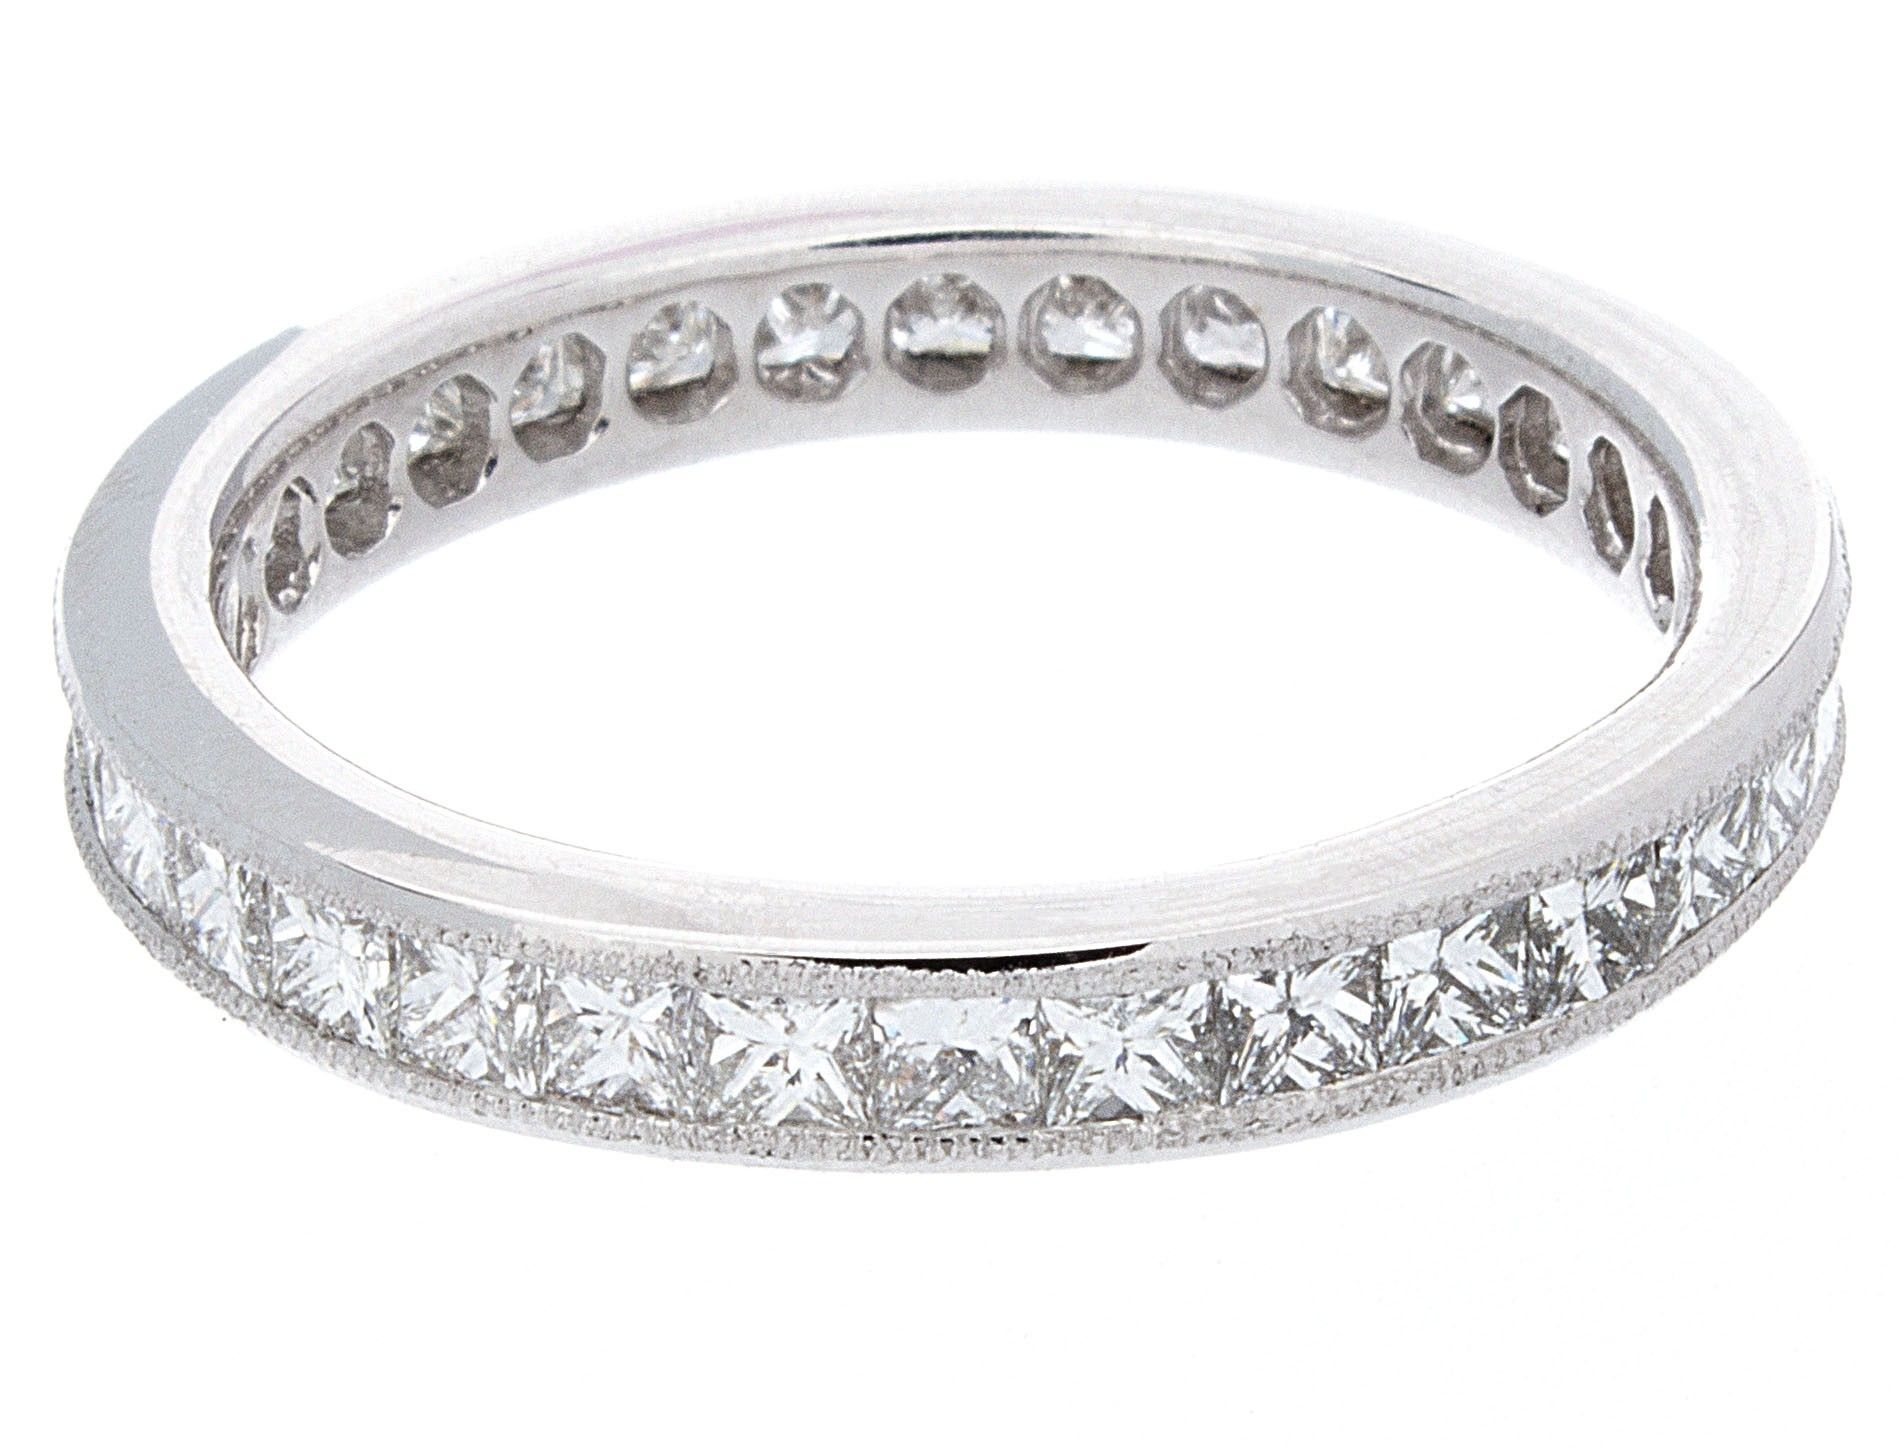 Channel Set Princess Cut Diamond Eternity Band Ring In 14k White Intended For Newest Diamond Eternity Wedding Bands In 14k White Gold (View 8 of 15)